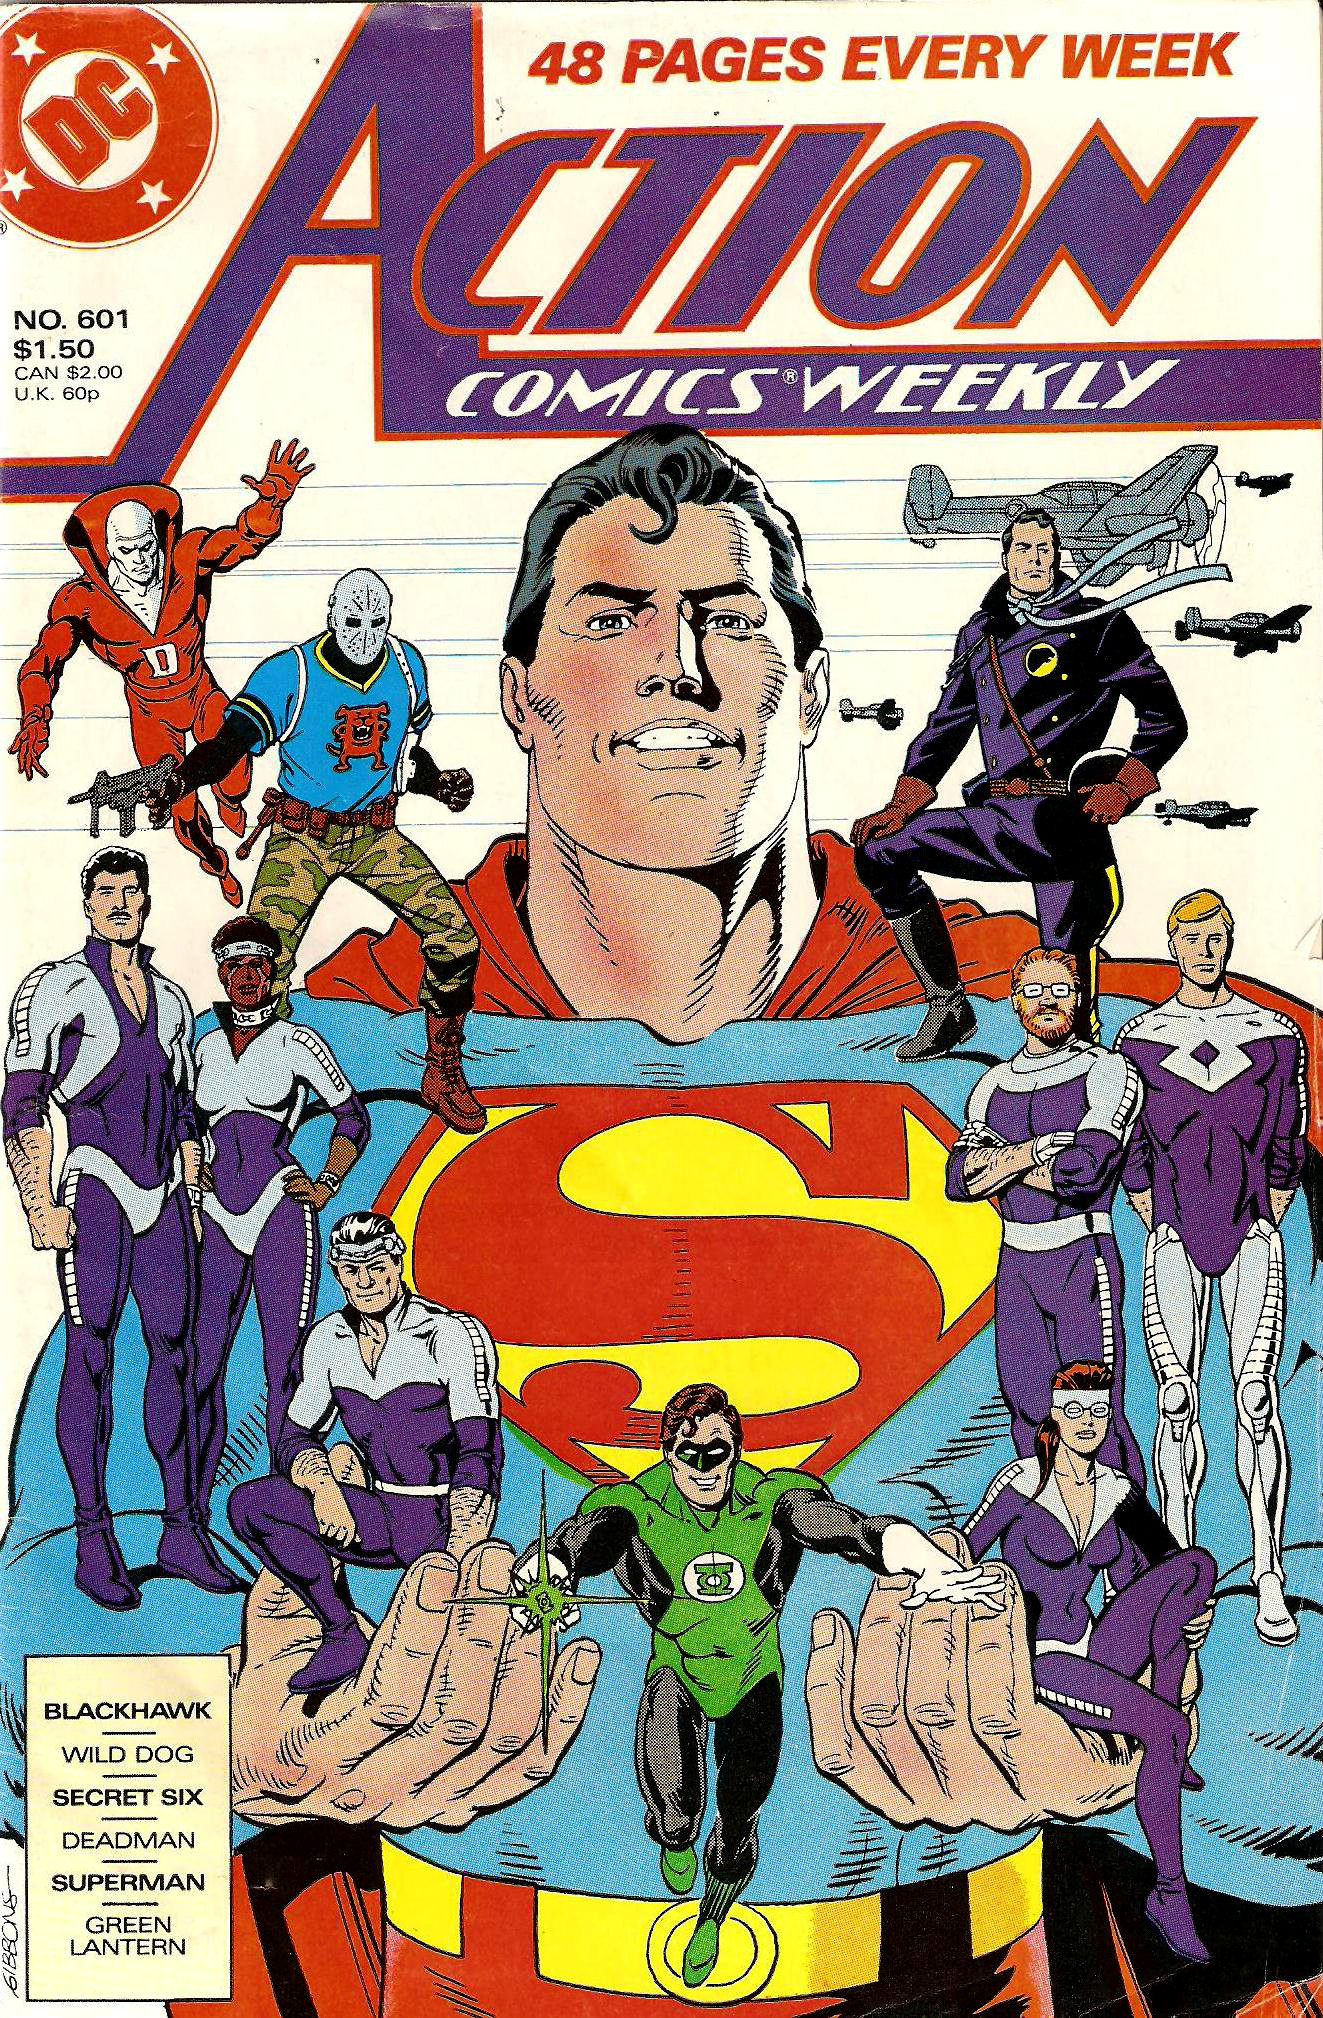 Action Comics Weekly #601 (1988) Cover